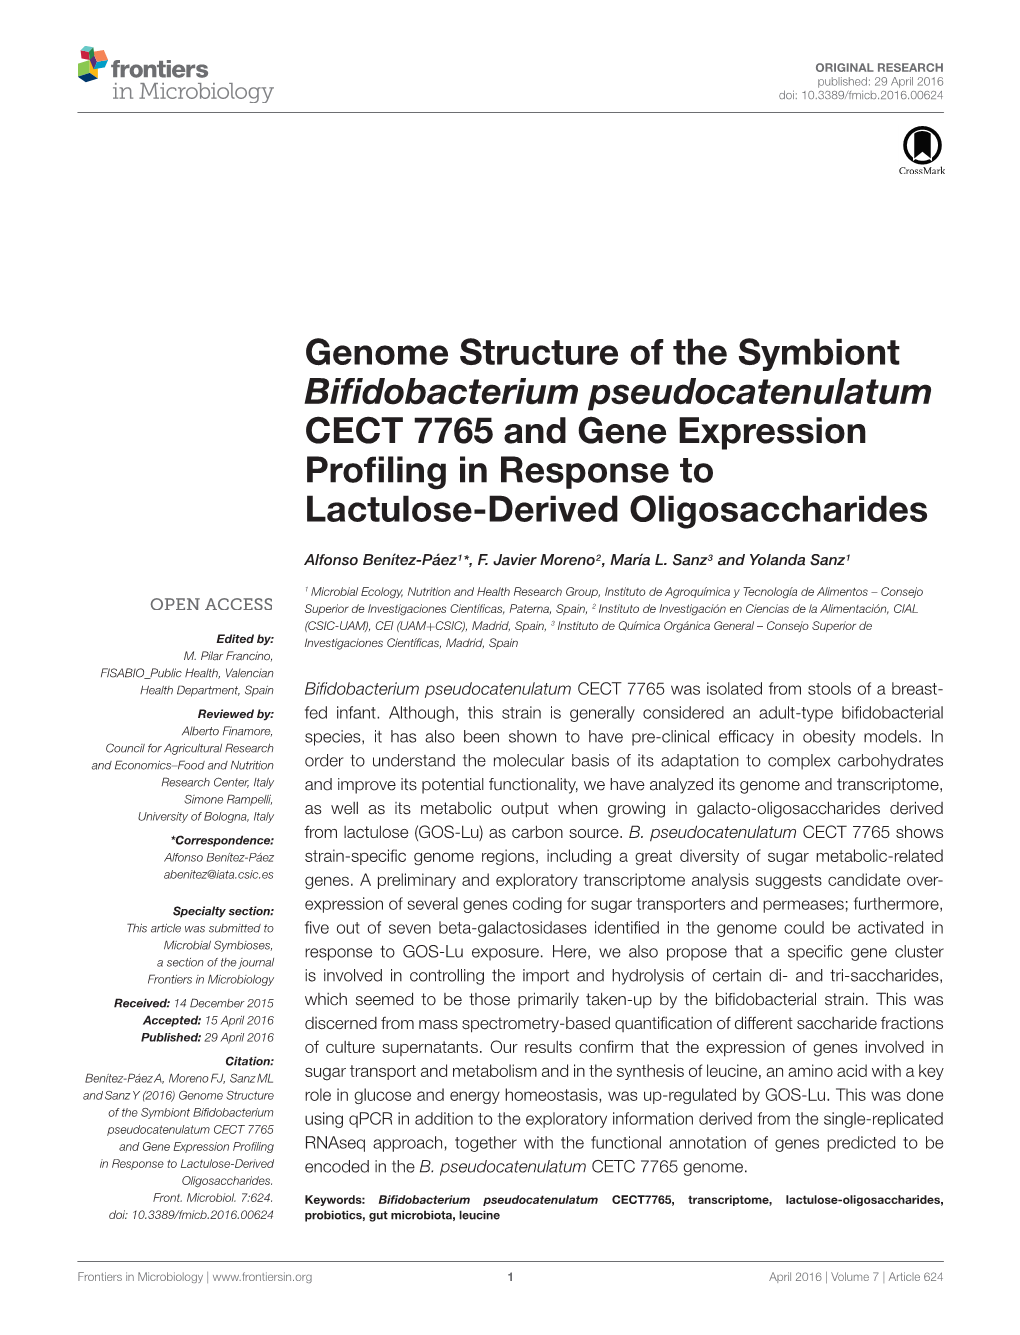 Genome Structure of the Symbiont Bifidobacterium